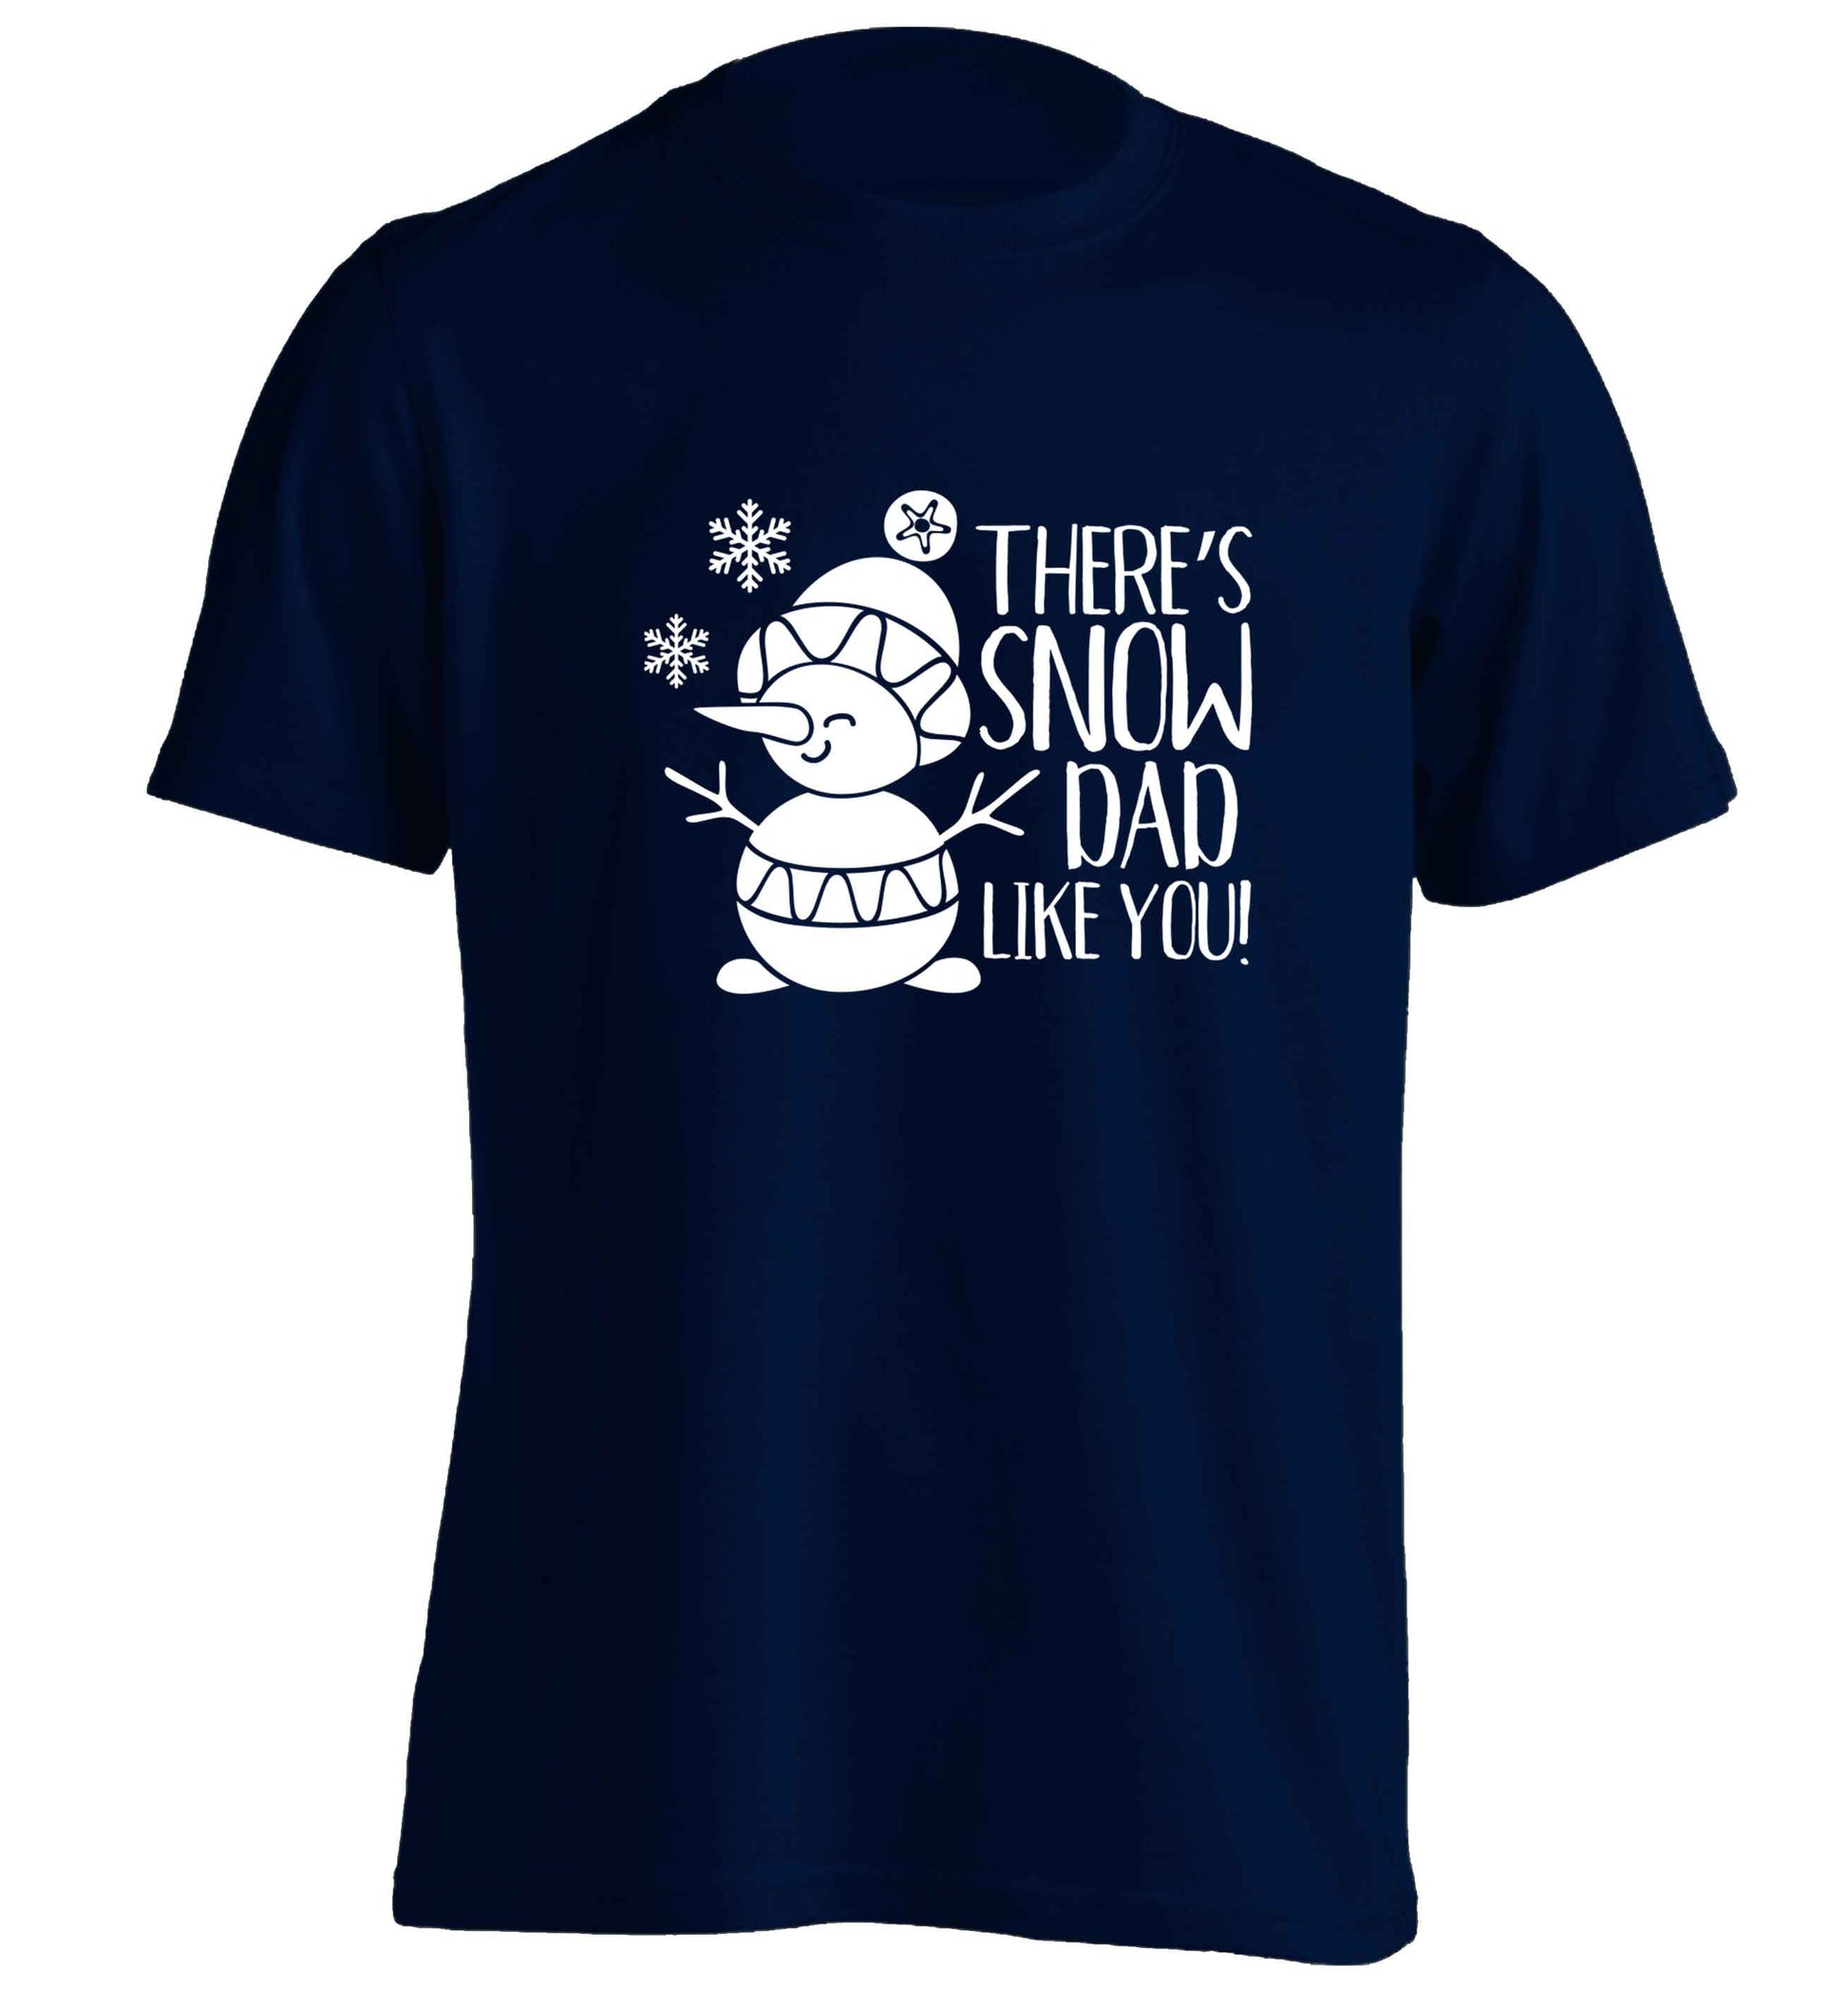 There's snow dad like you adults unisex navy Tshirt 2XL